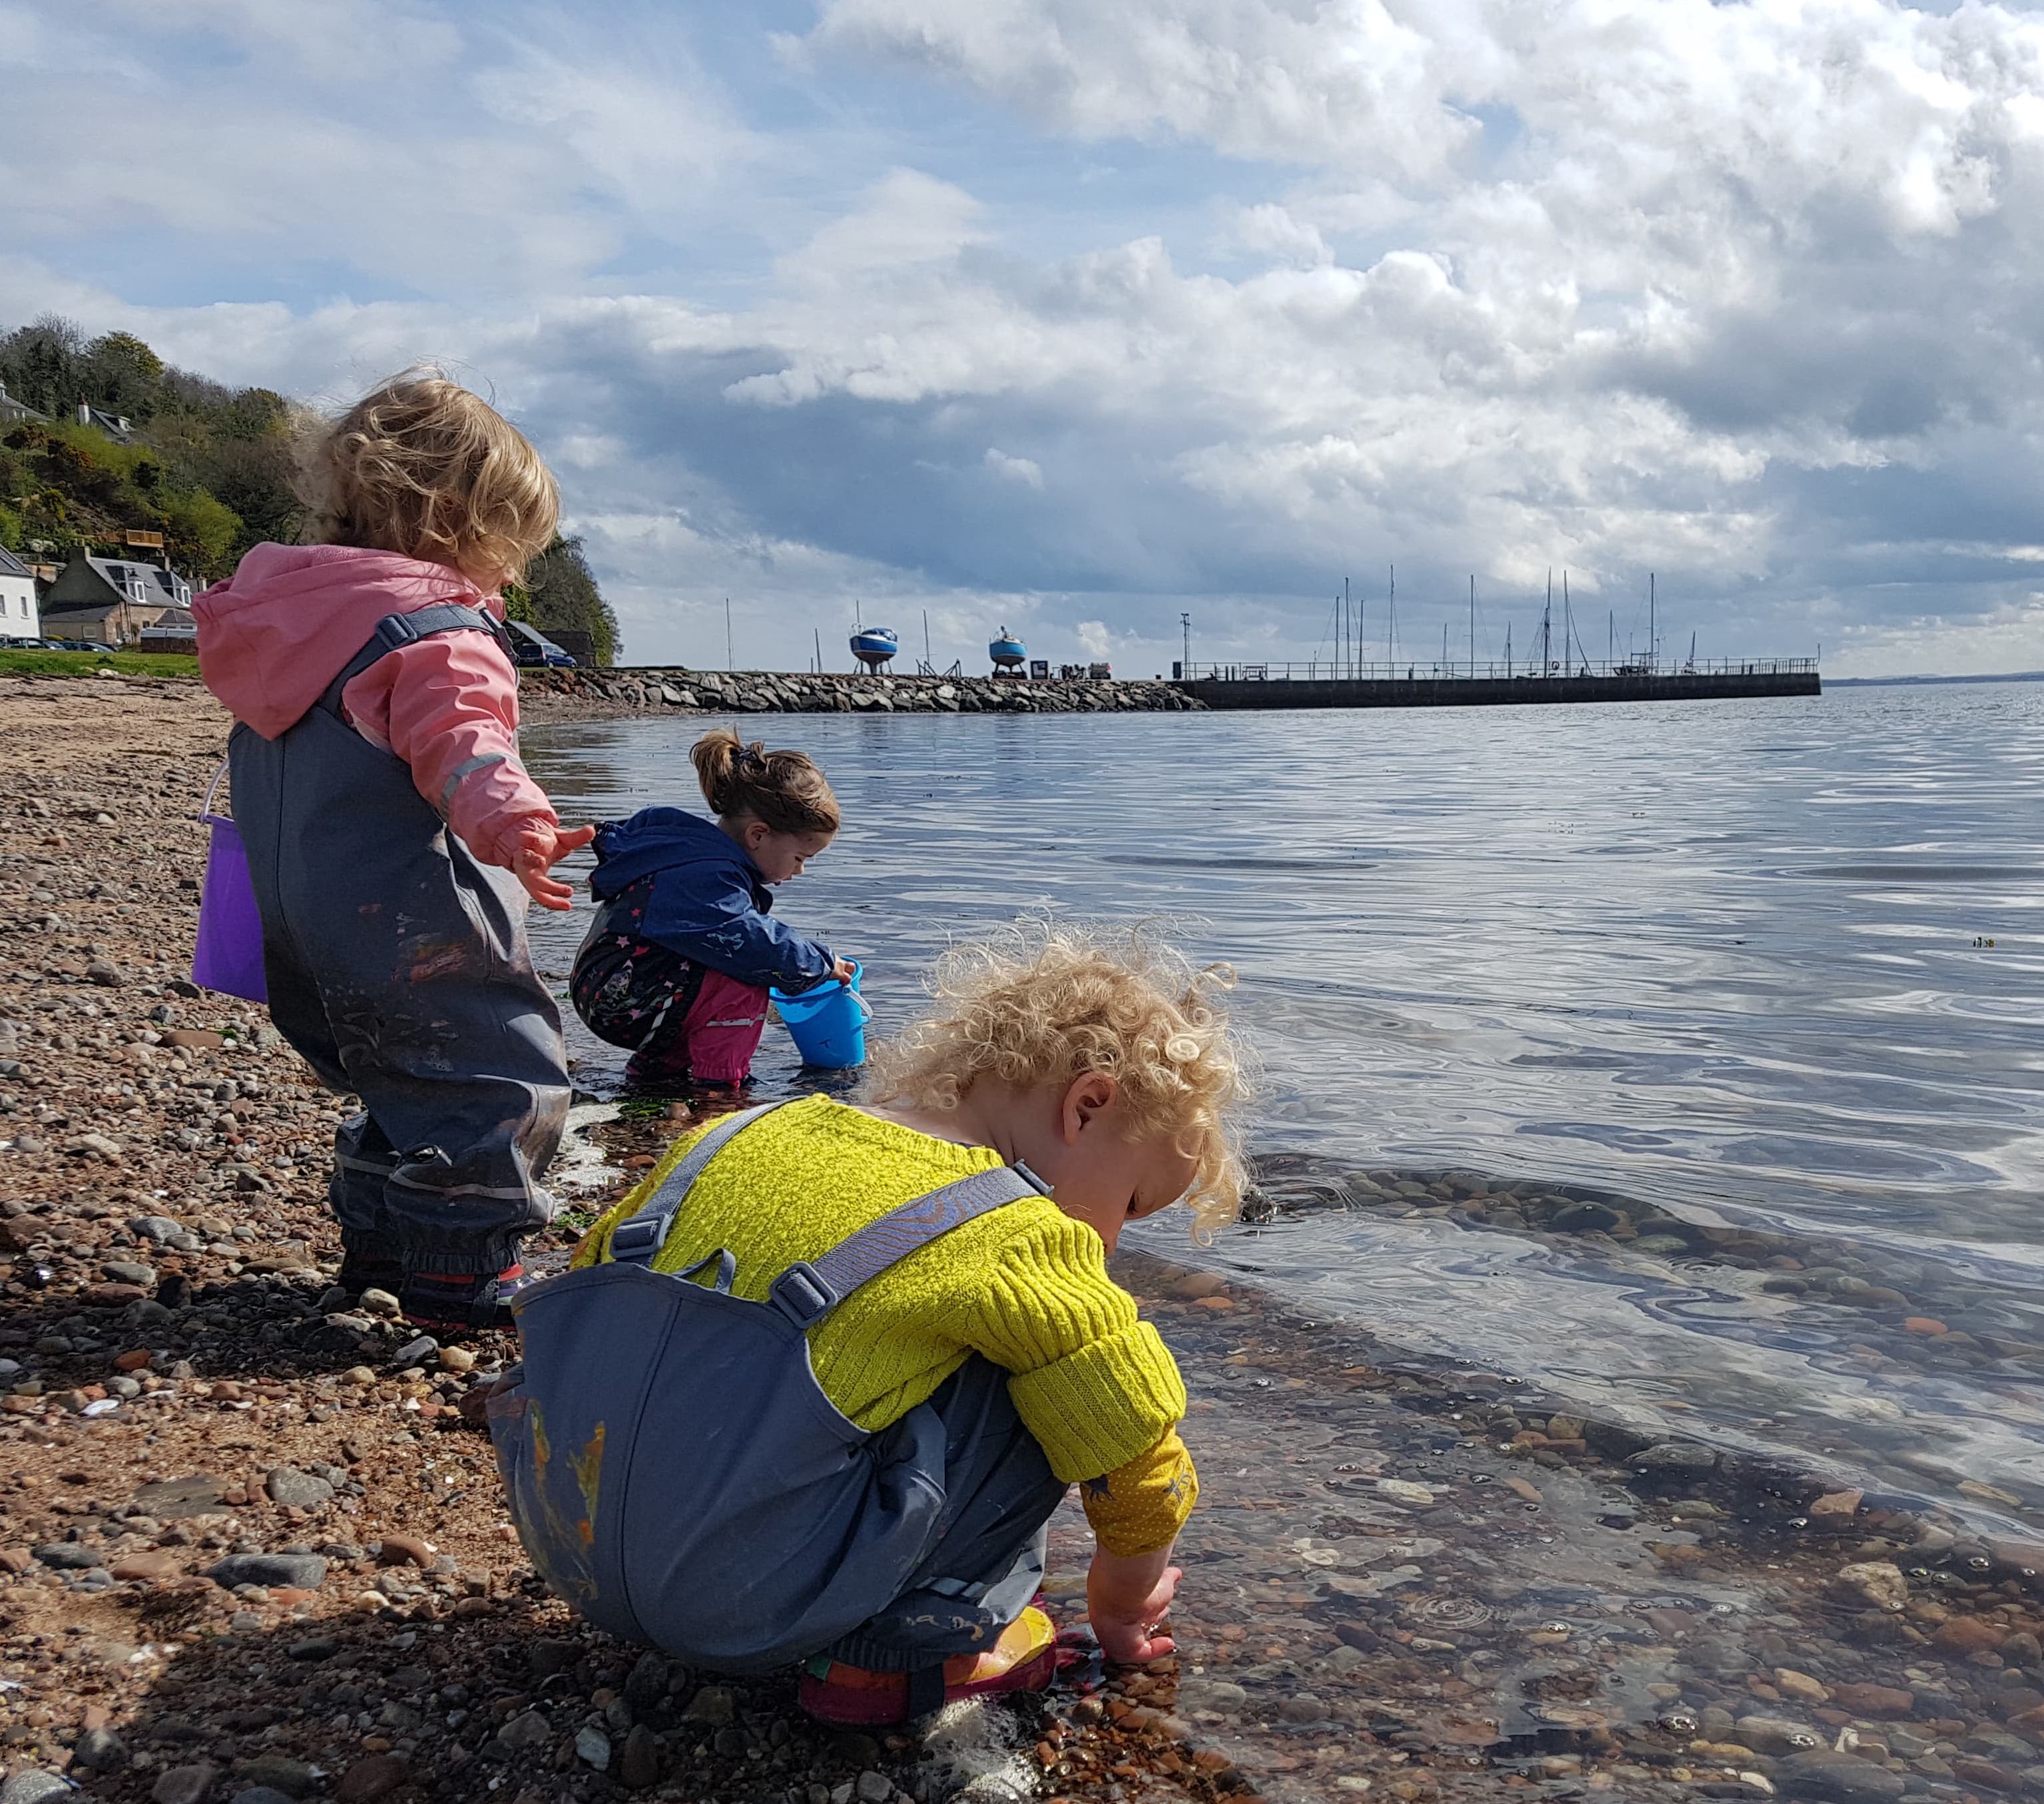 Young children of pre-school age explore a stretch of pebble beach by the water. A young boy in yellow is crouched at the water edge.